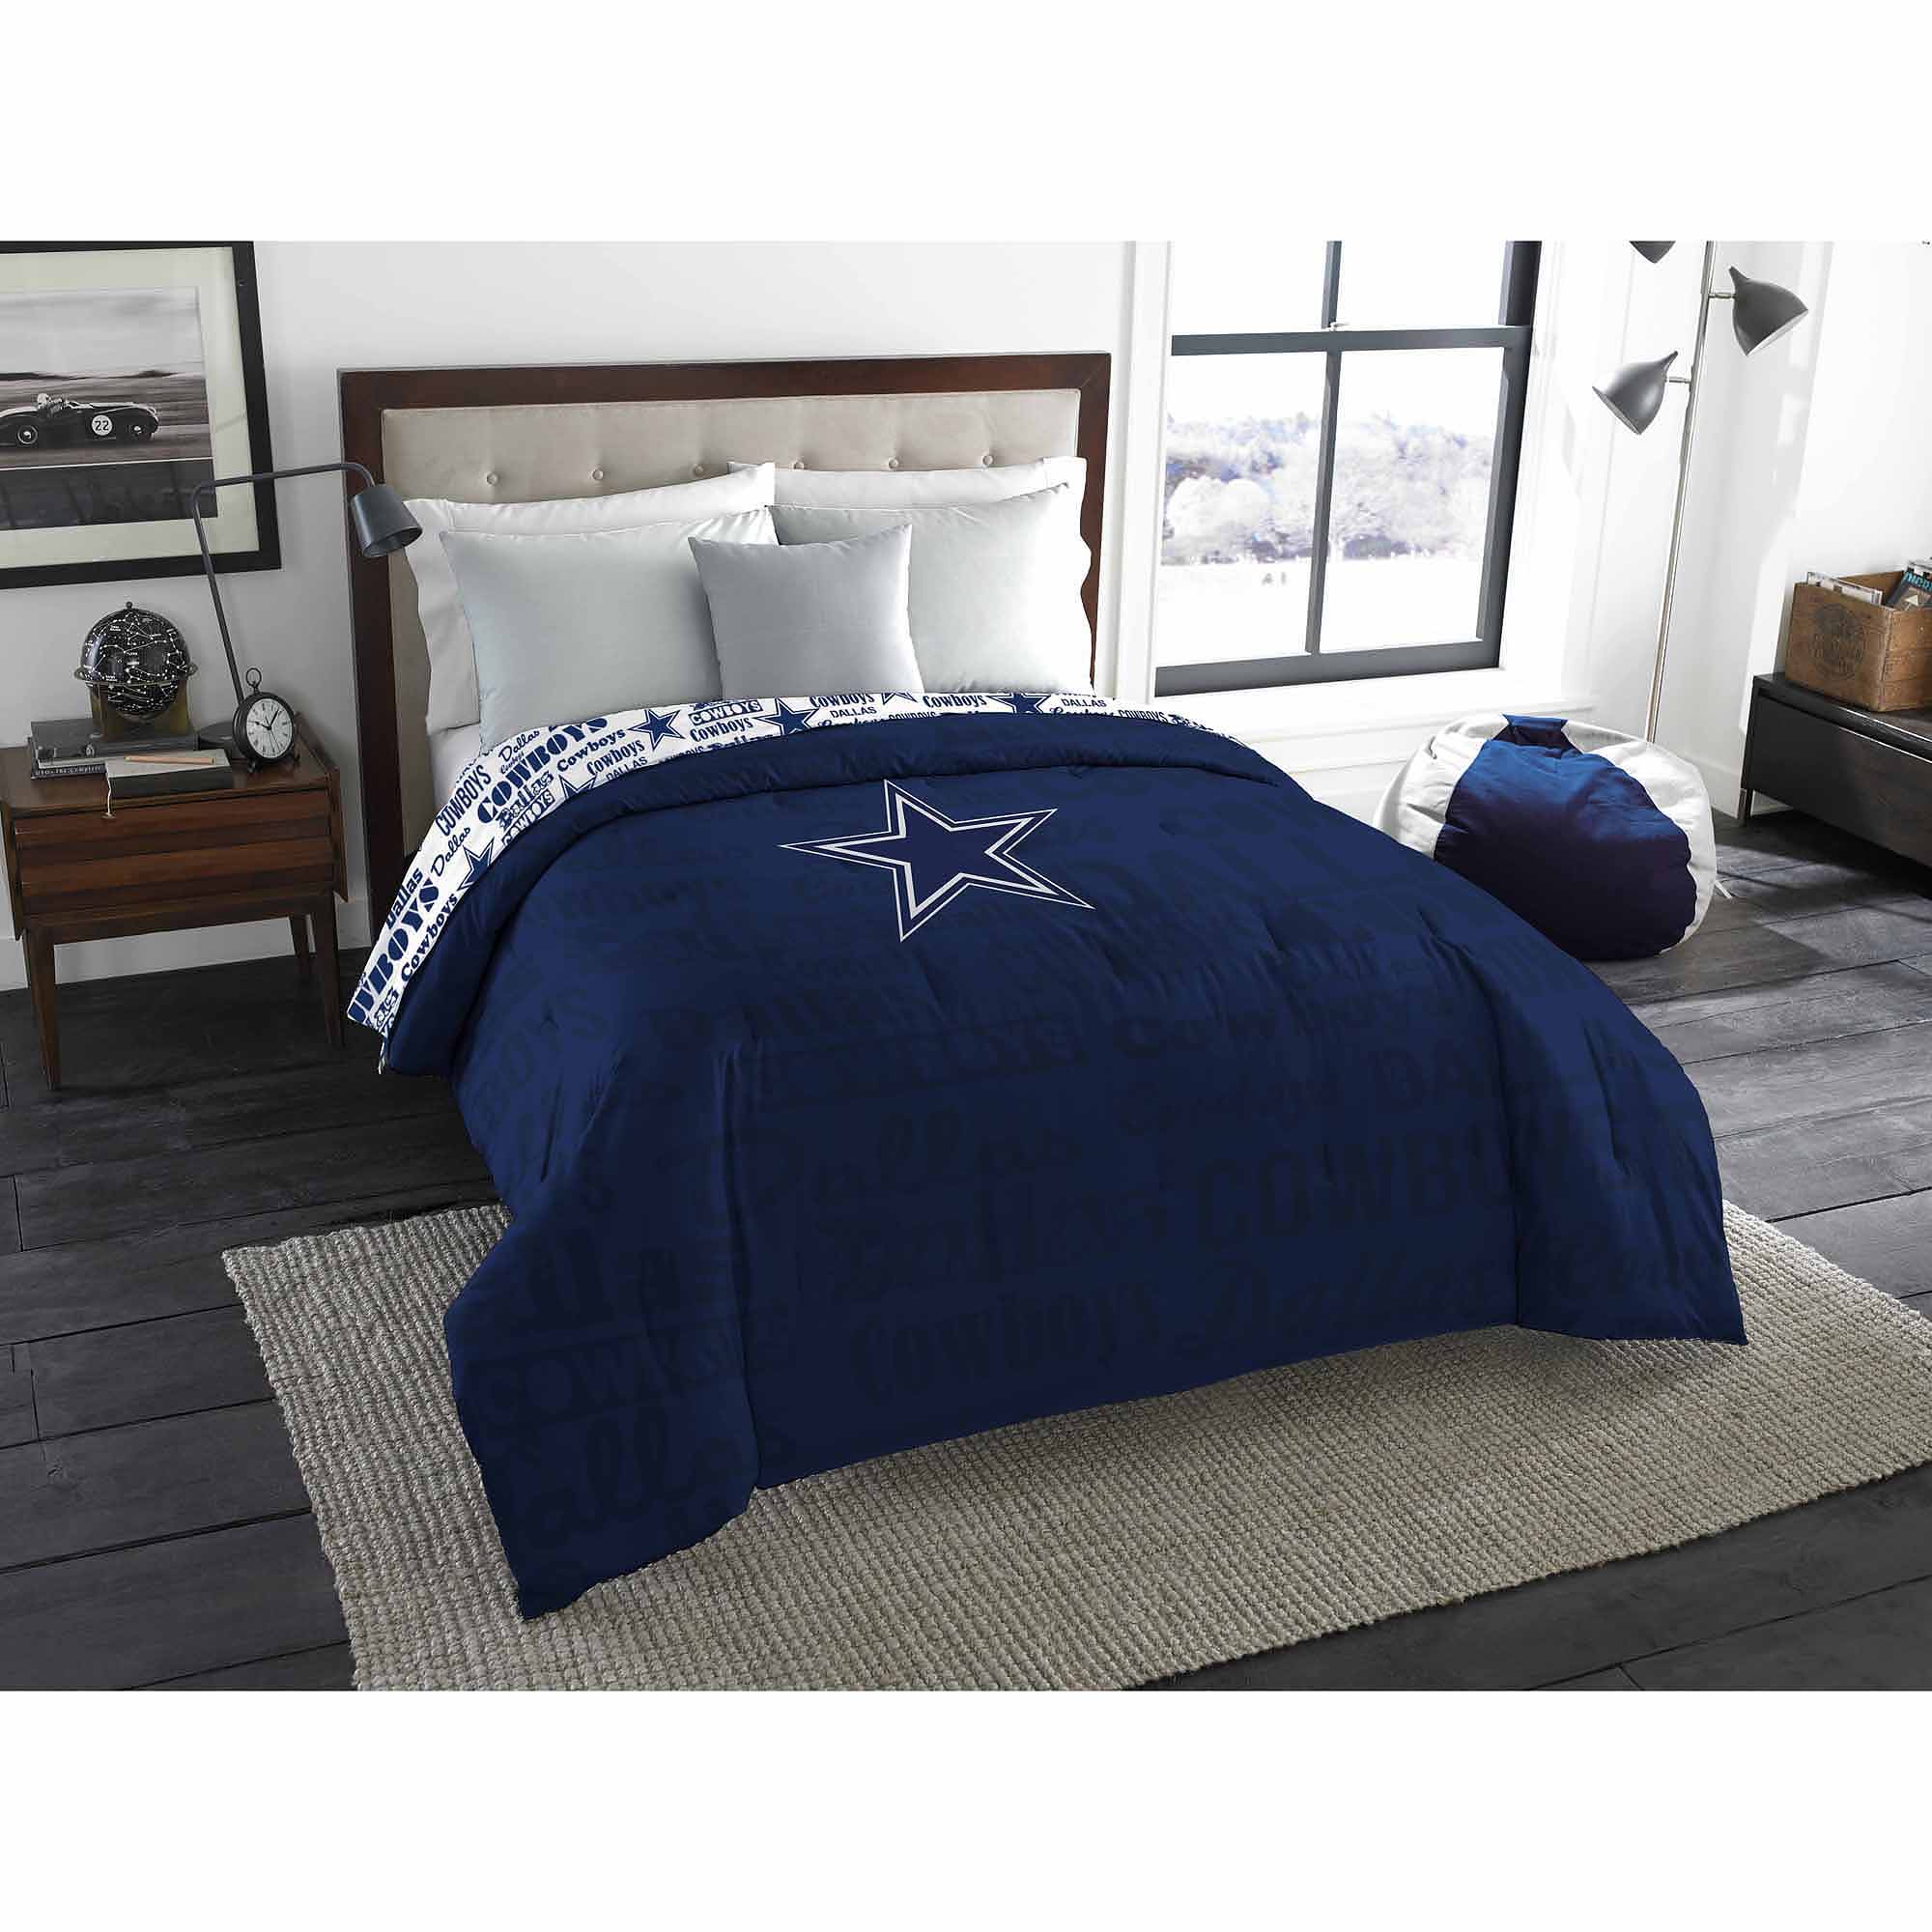 NFL Dallas Cowboys Twin/Full Bedding Comforter - image 1 of 1